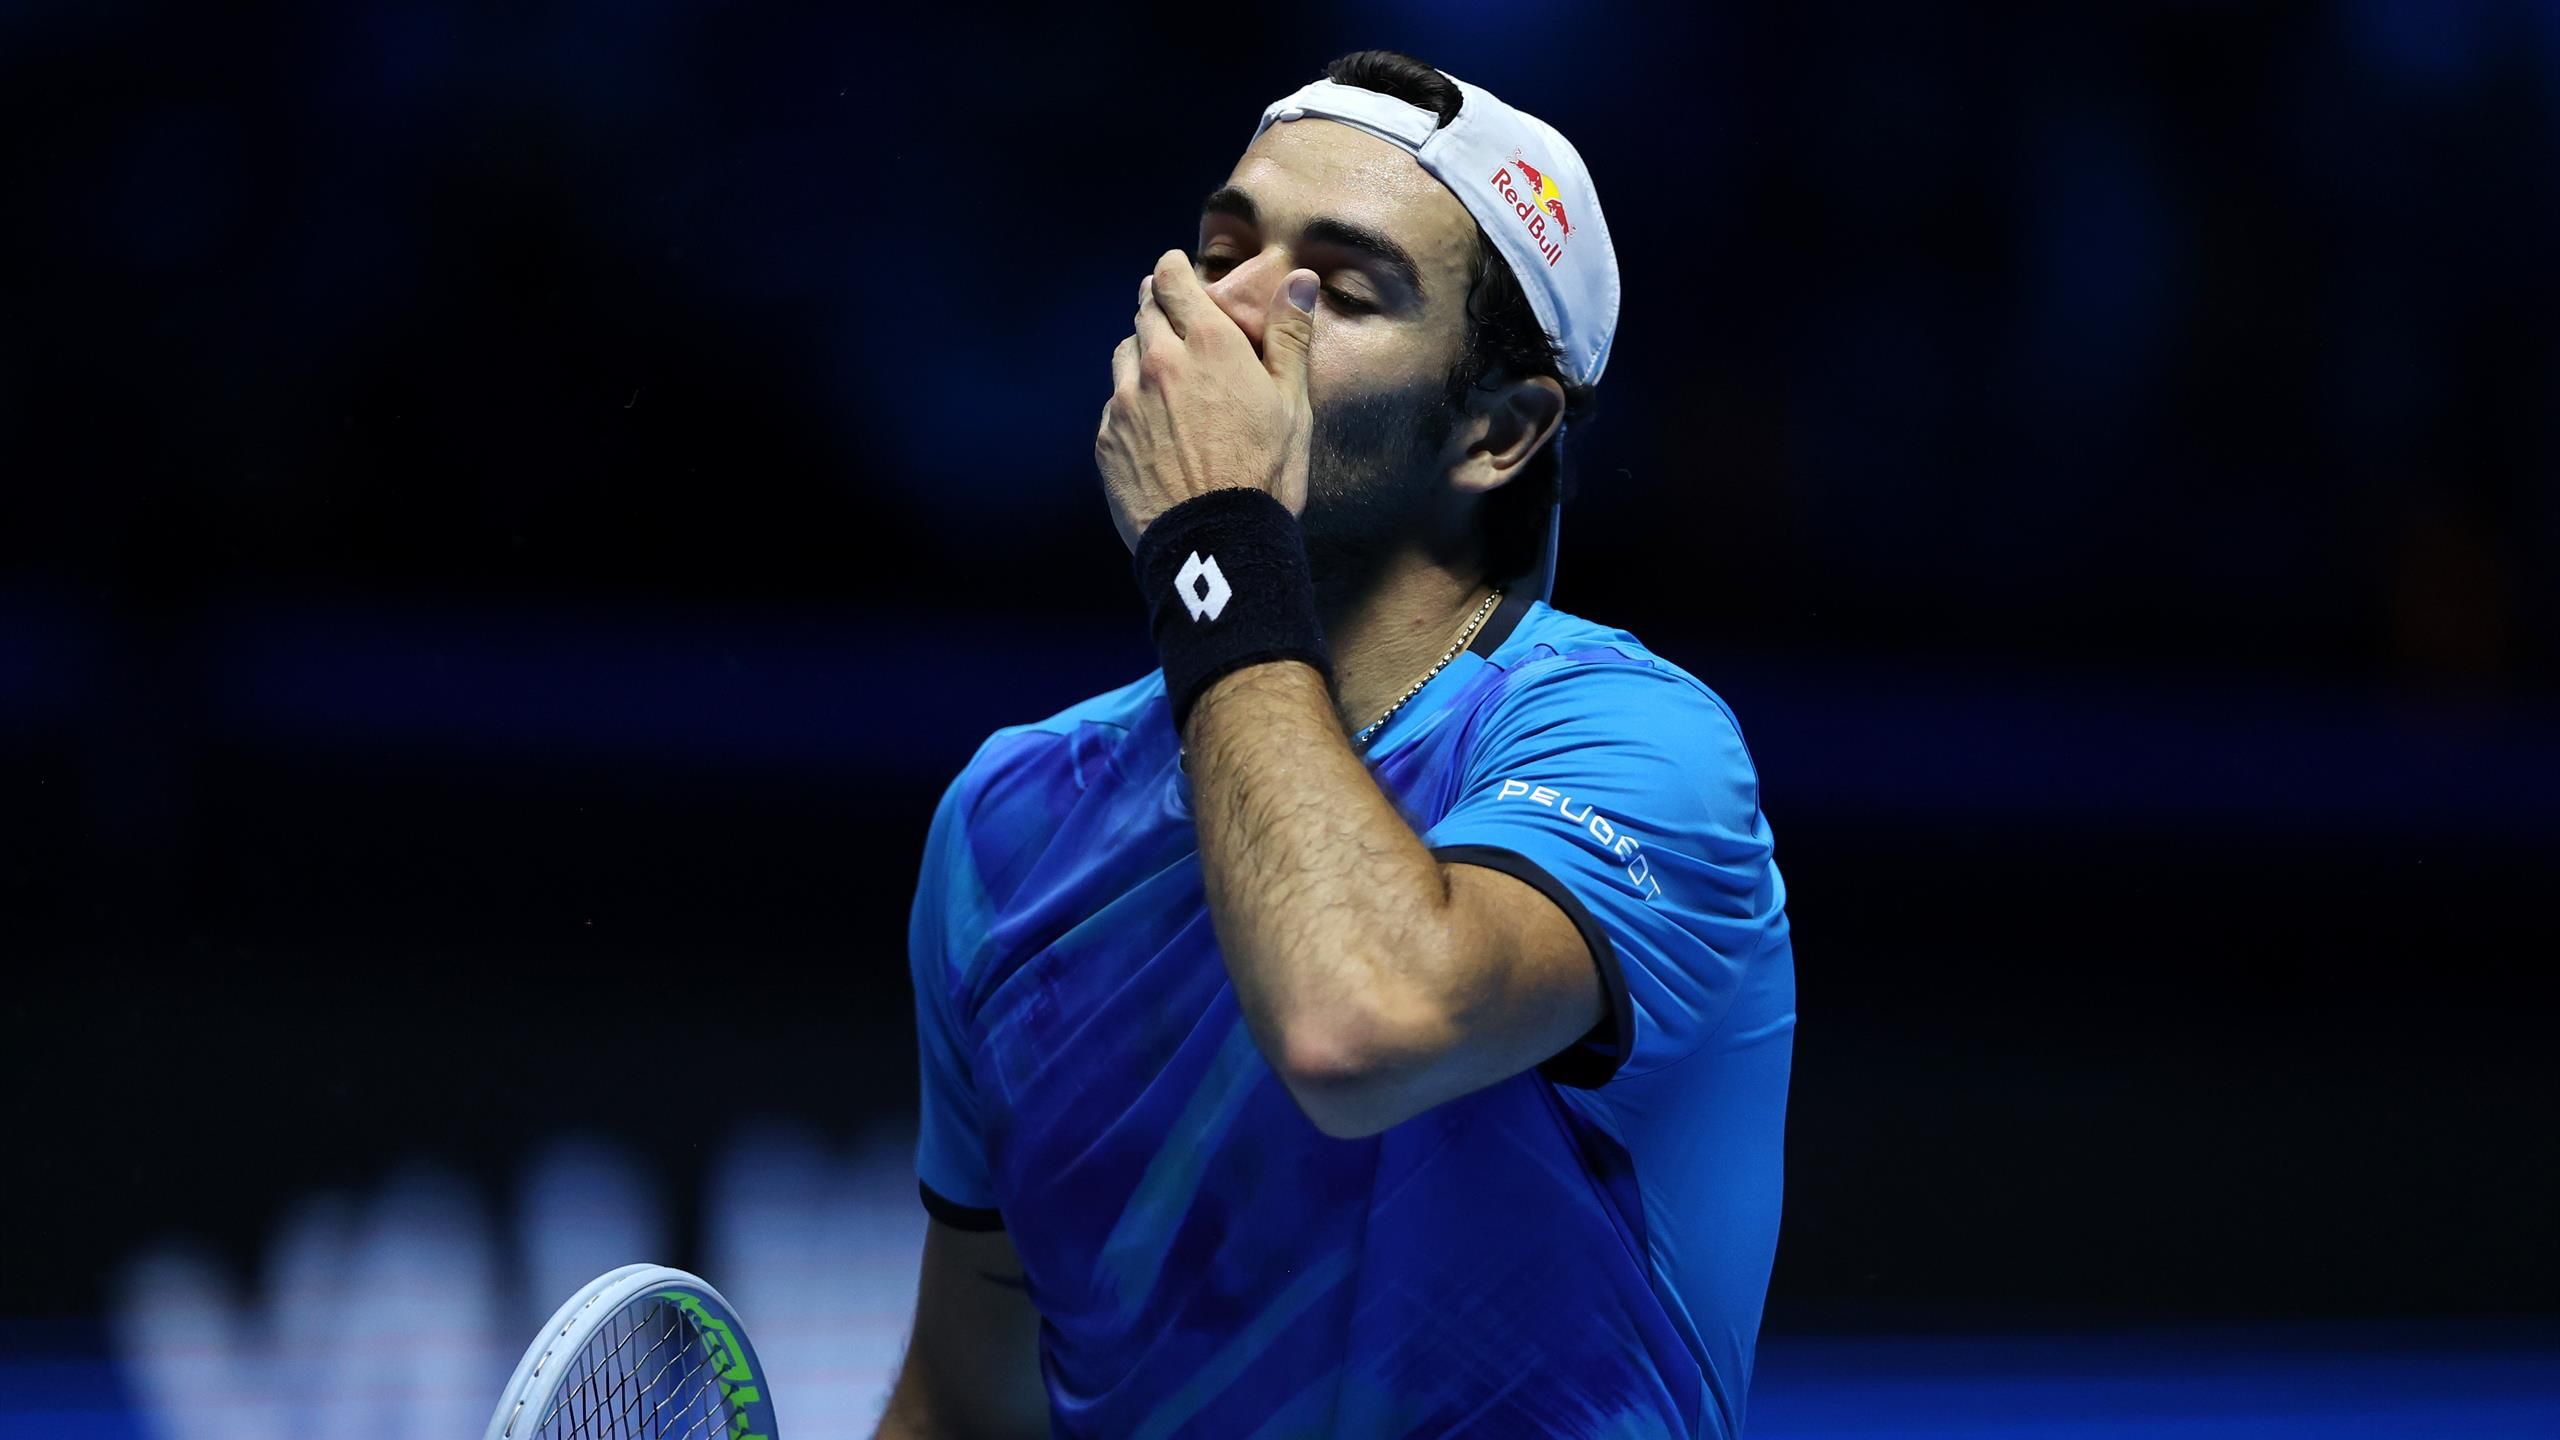 Matteo Berrettini suffers heartbreak as injury ends ATP Finals match against Sascha Zverev to leave tournament in doubt